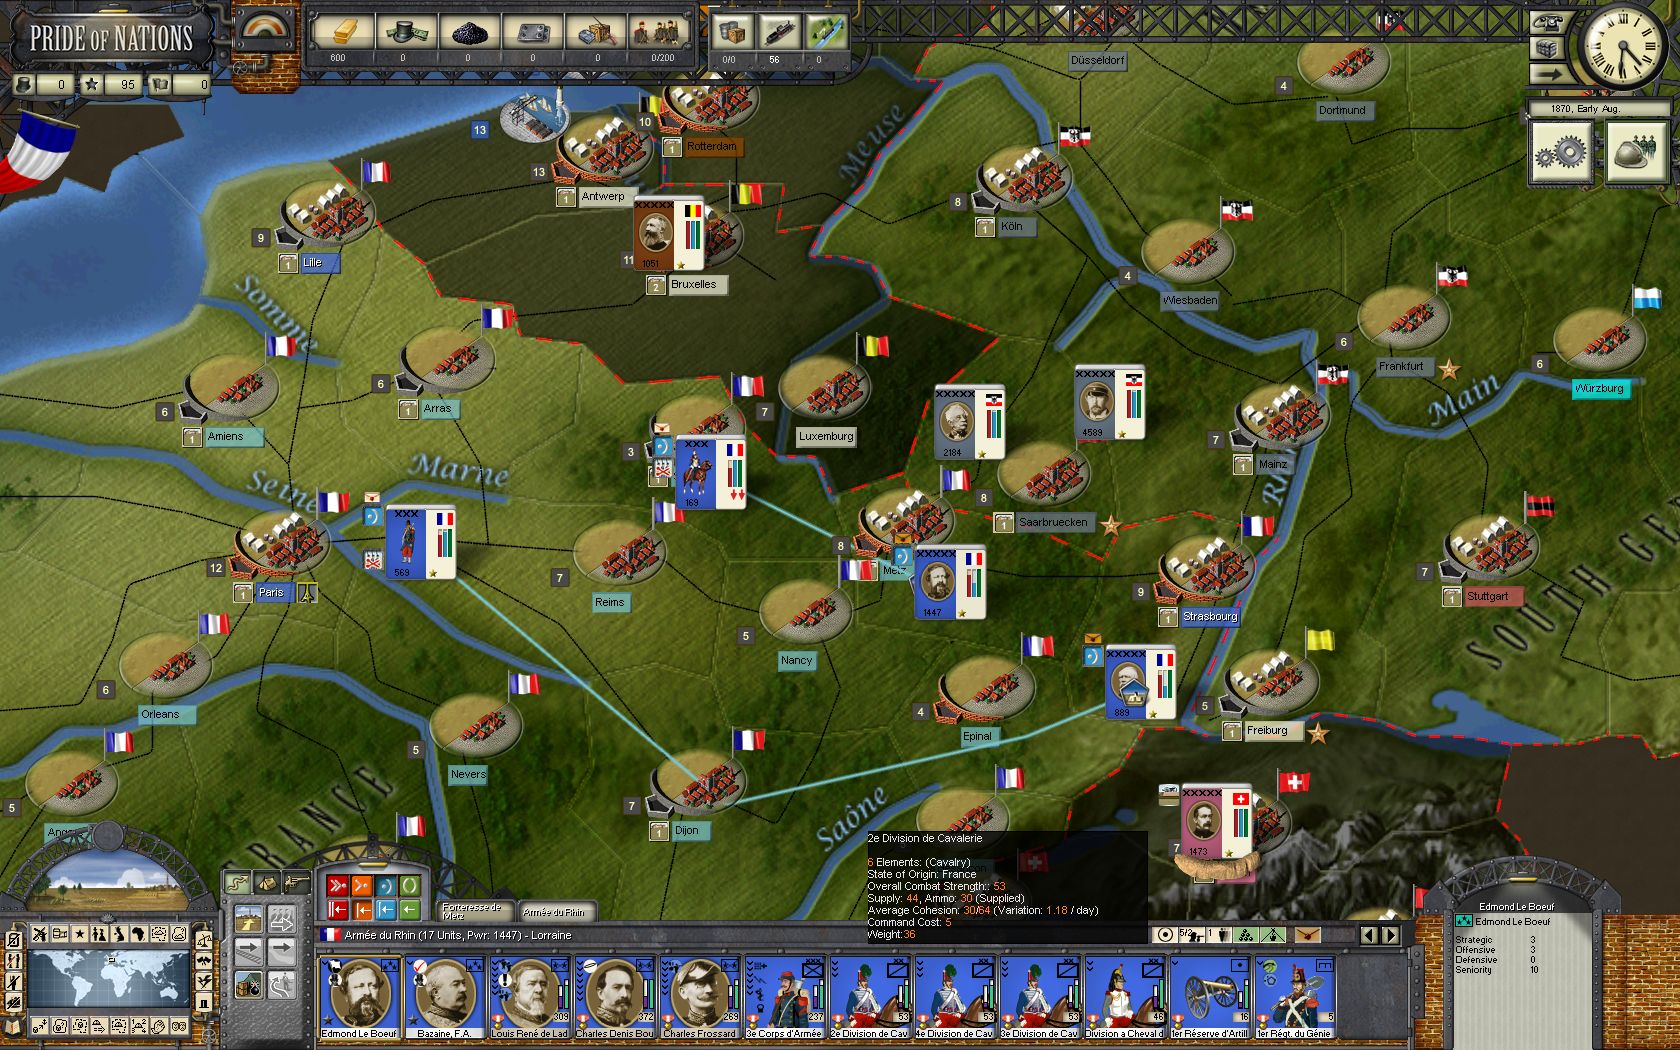 Pride of Nations - The Franco-Prussian War 1870 DLC Steam CD Key, $4.38